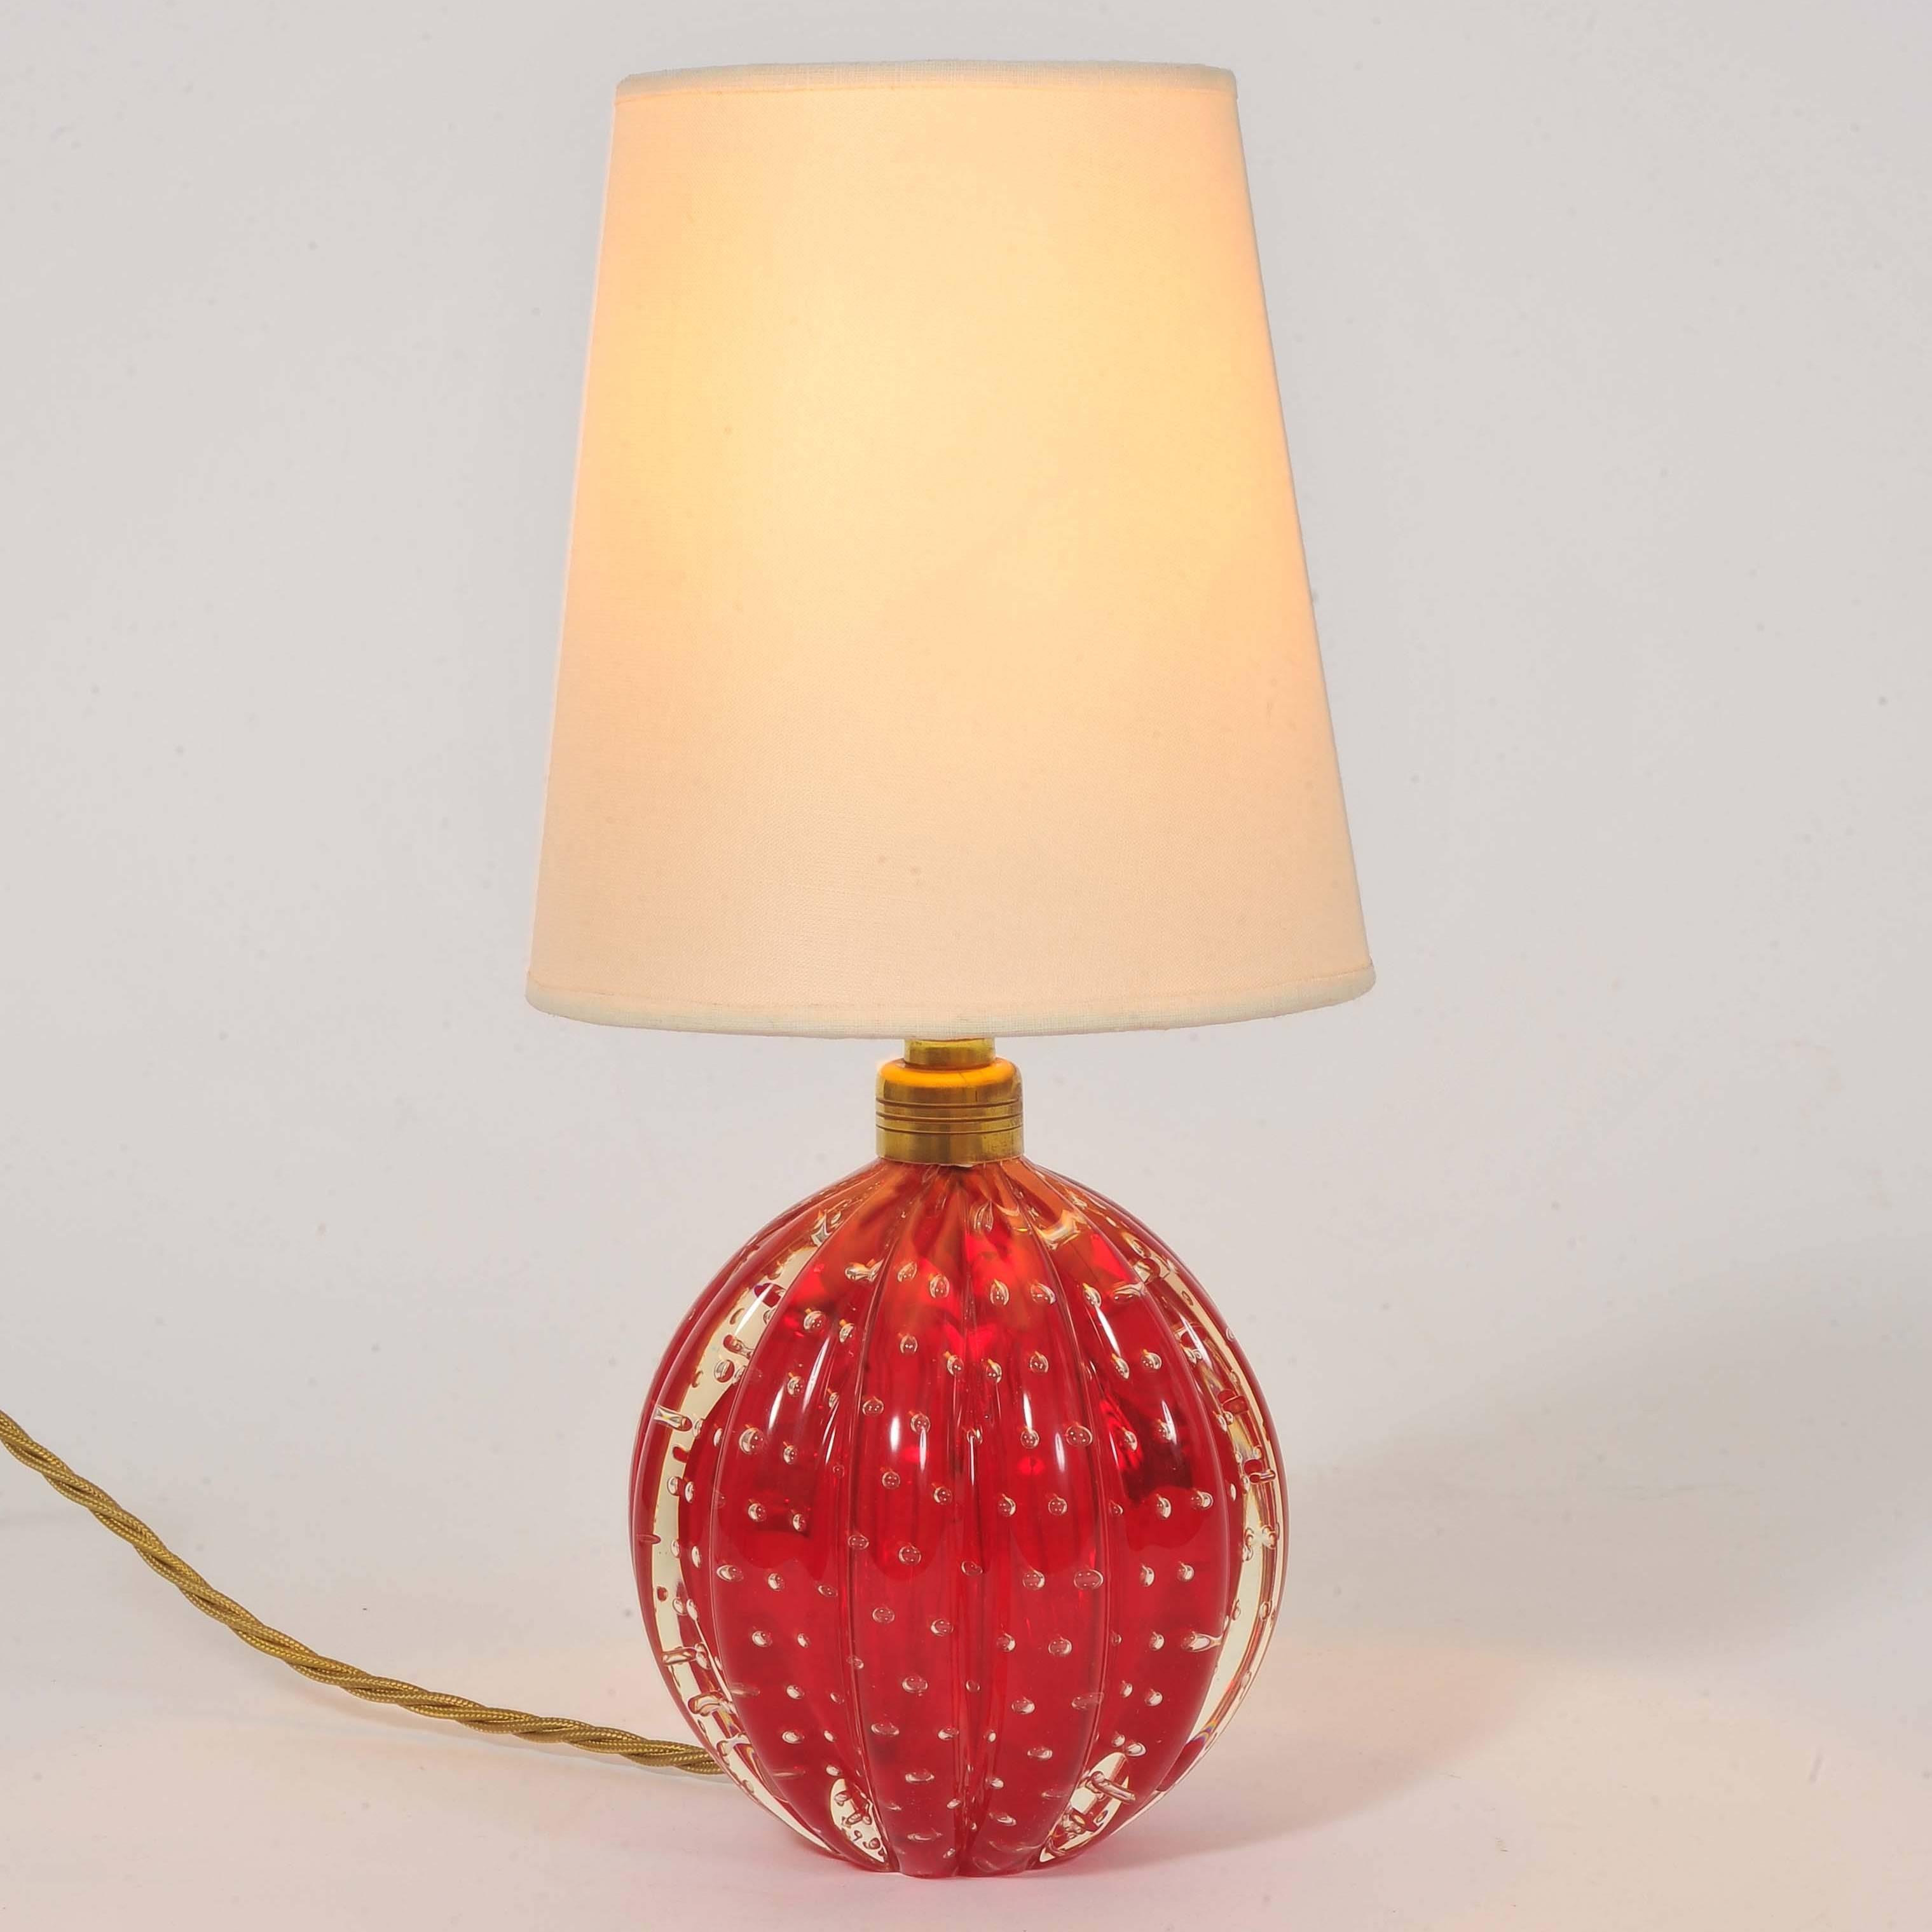 Italian glass ball lamps in red aerated glass with ribbed sides.